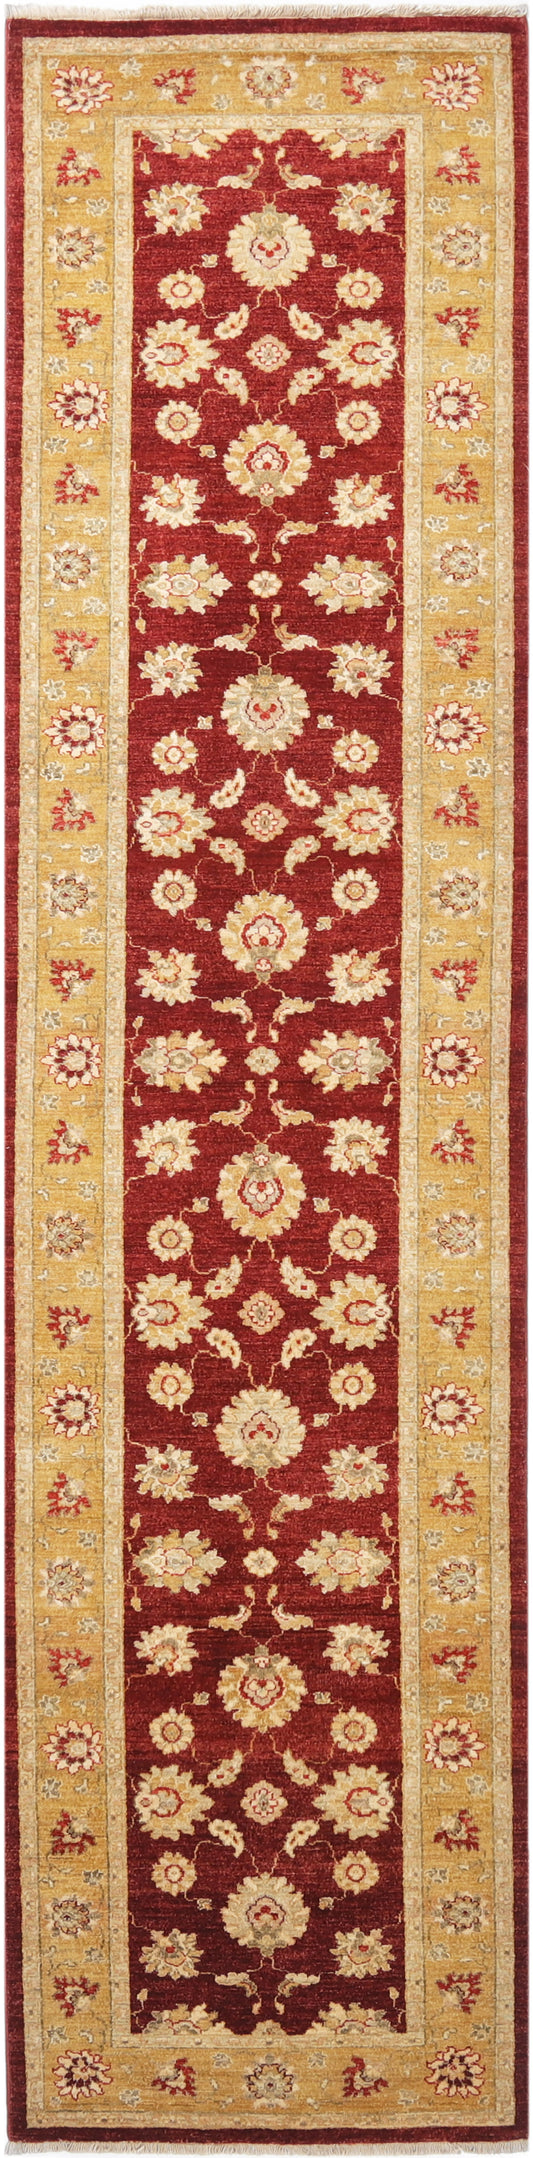 2.5x12 Hand-Knotted Ariana Carpet 2'.10" X 12' Traditional, Red Fine Wool Runner Rug D40672